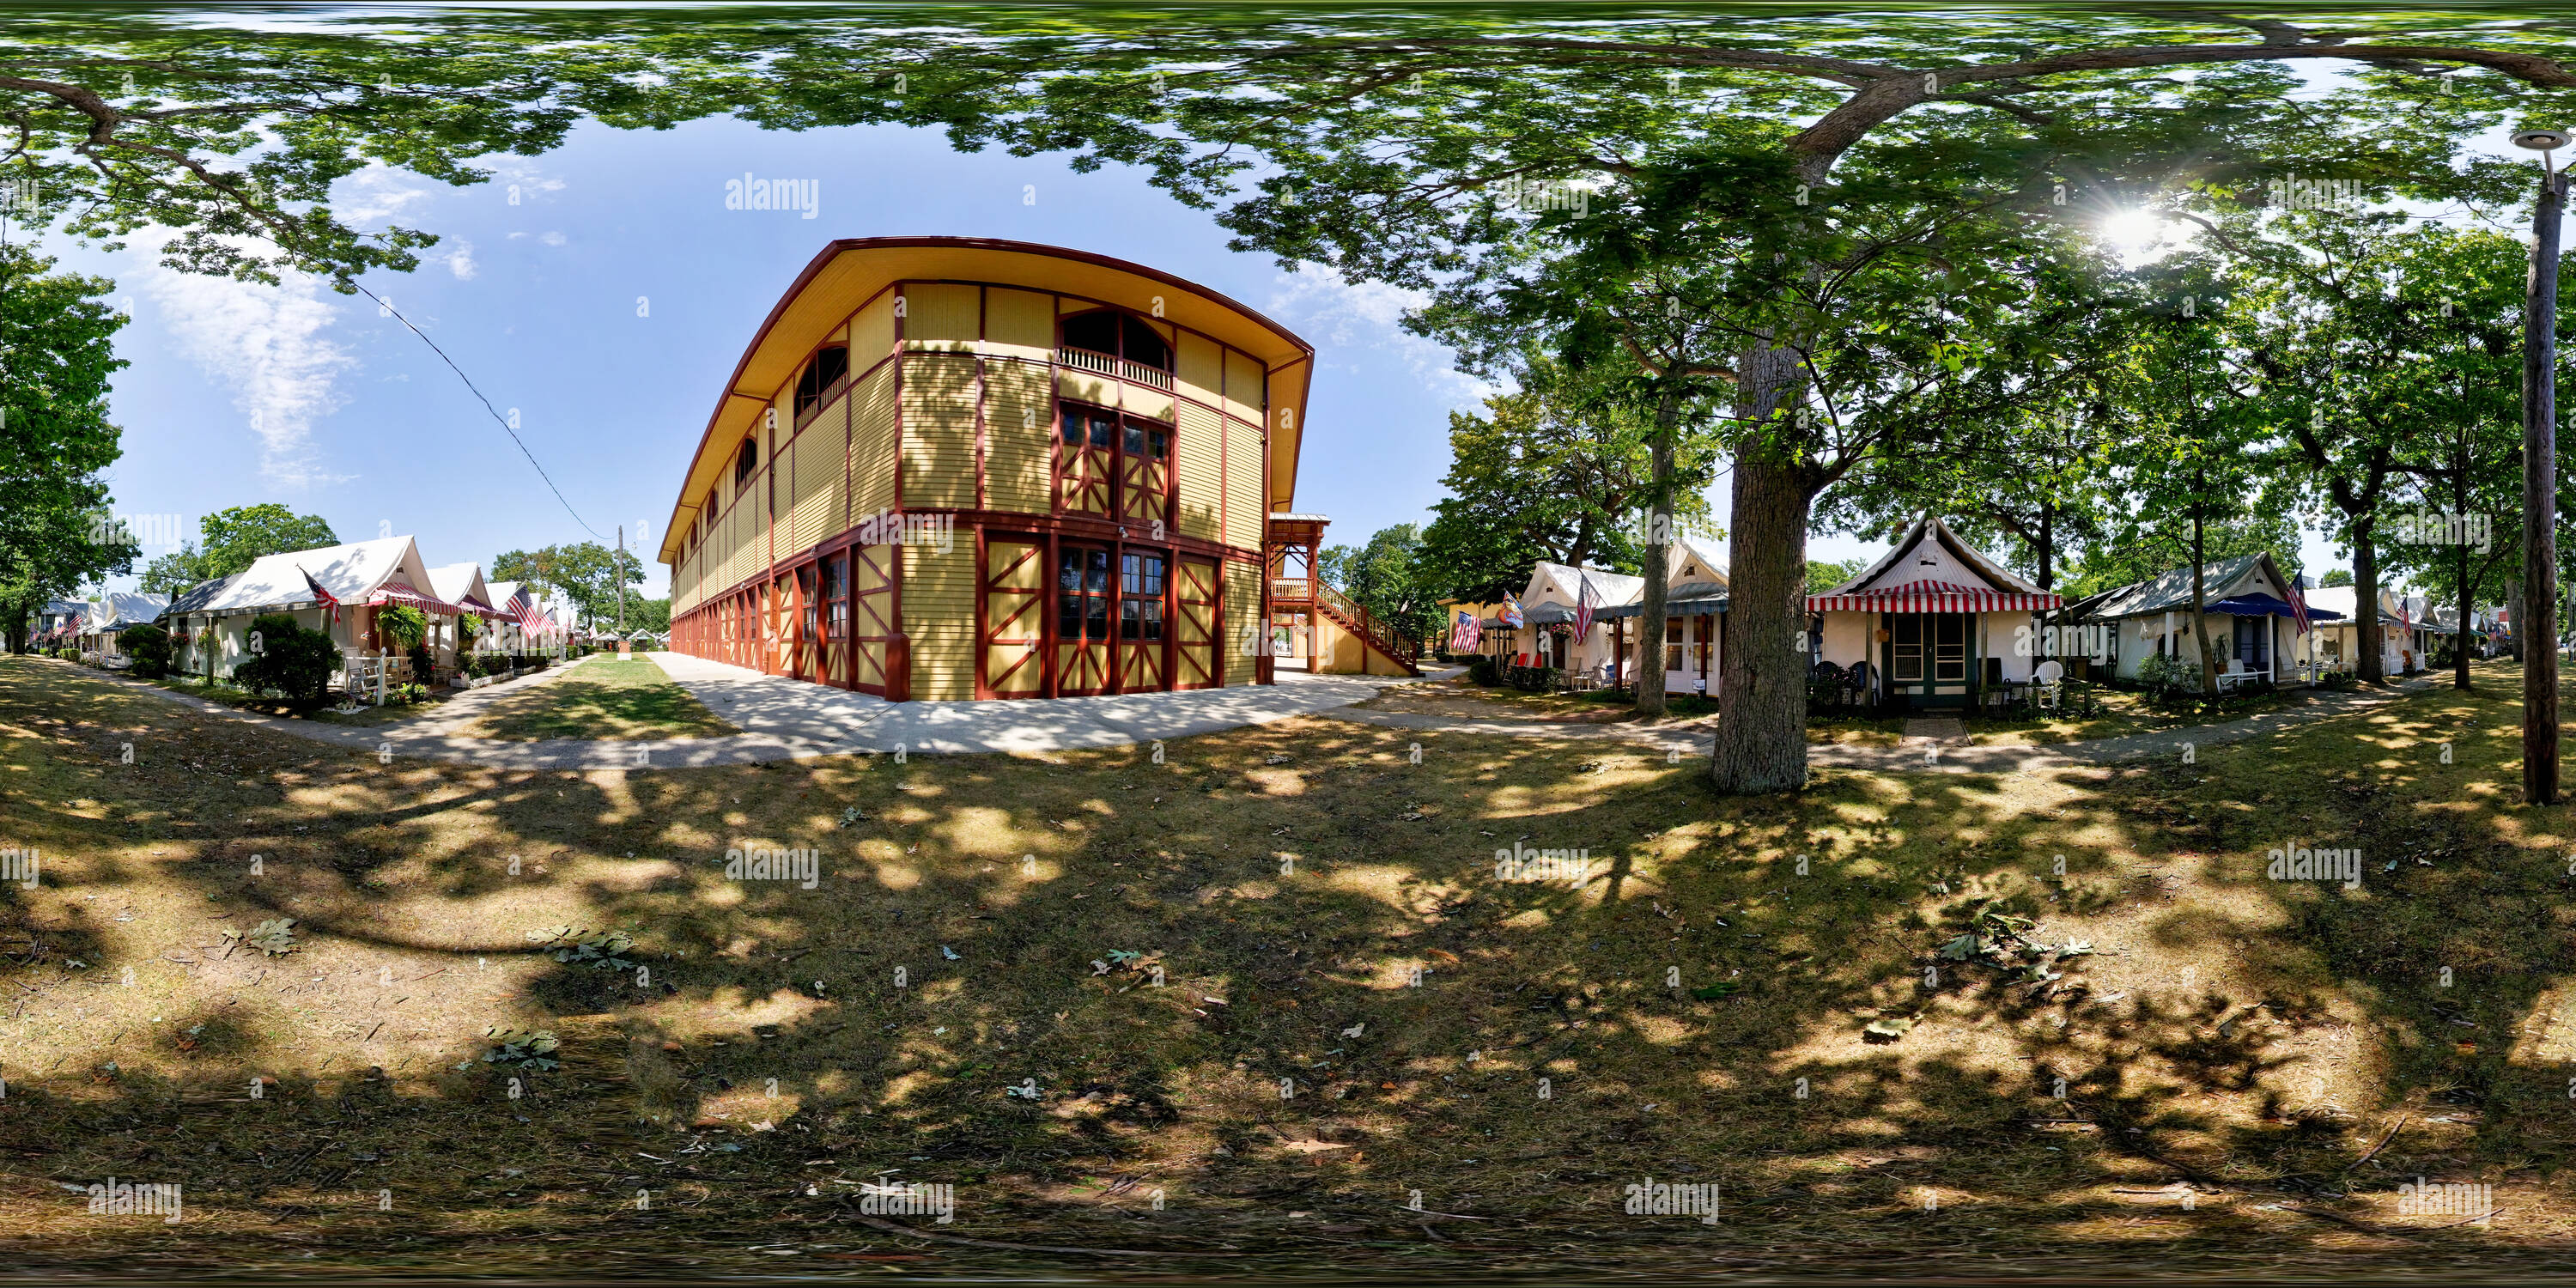 360 degree panoramic view of Tent Colony, Mt. Zion Way, Ocean Grove, New Jersey